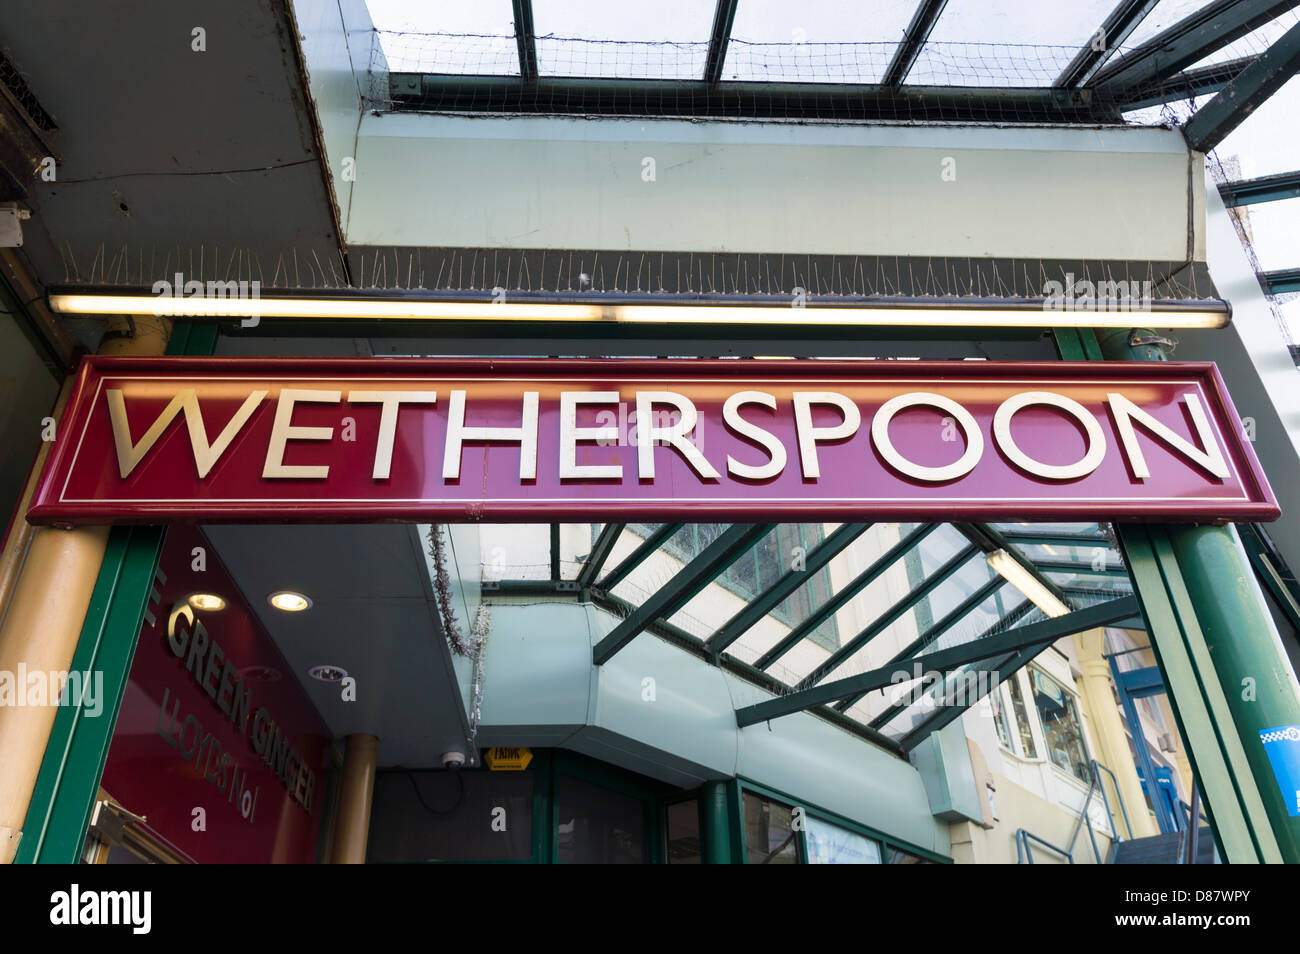 J D Wetherspoon pub chain logo sign Stock Photo